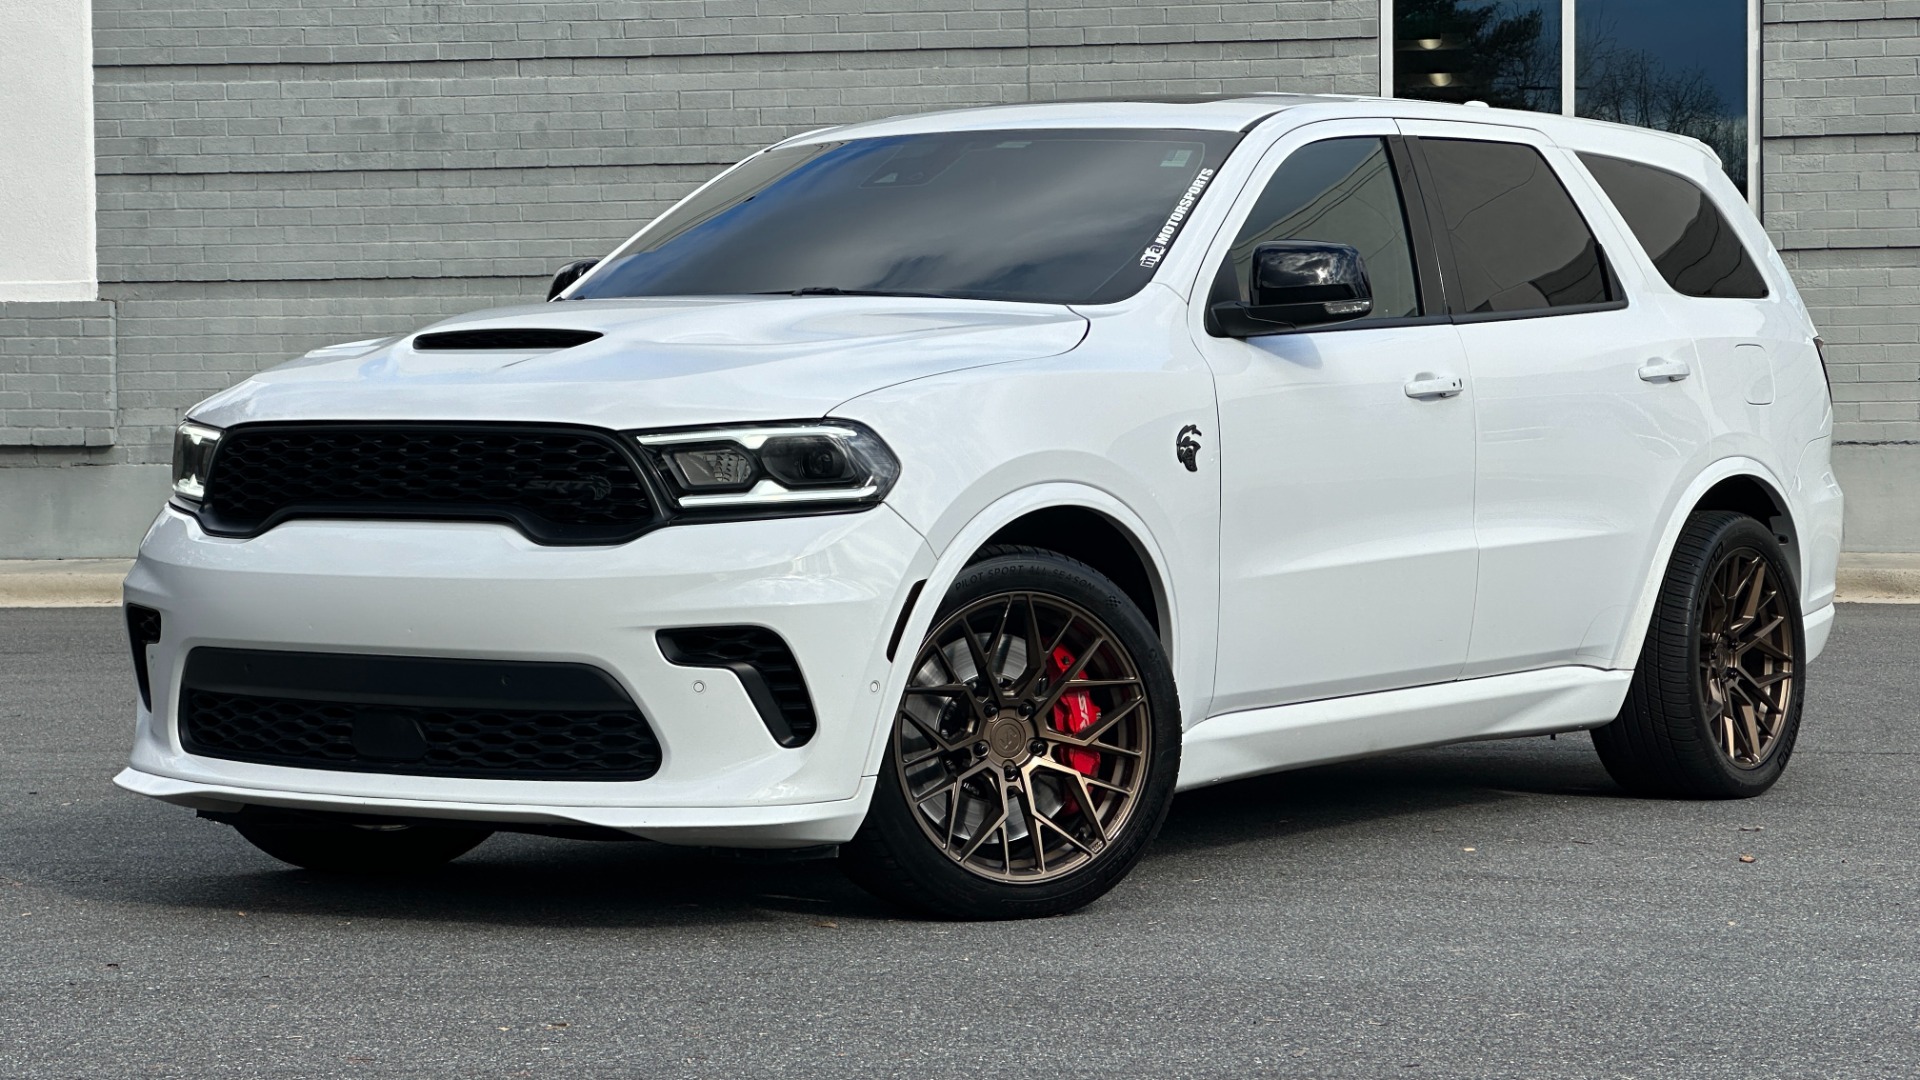 Used 2021 Dodge Durango SRT HELLCAT / CAPTAIN CHAIRS / DVD SCREENS / INTAKE / PULLEY for sale $98,495 at Formula Imports in Charlotte NC 28227 1